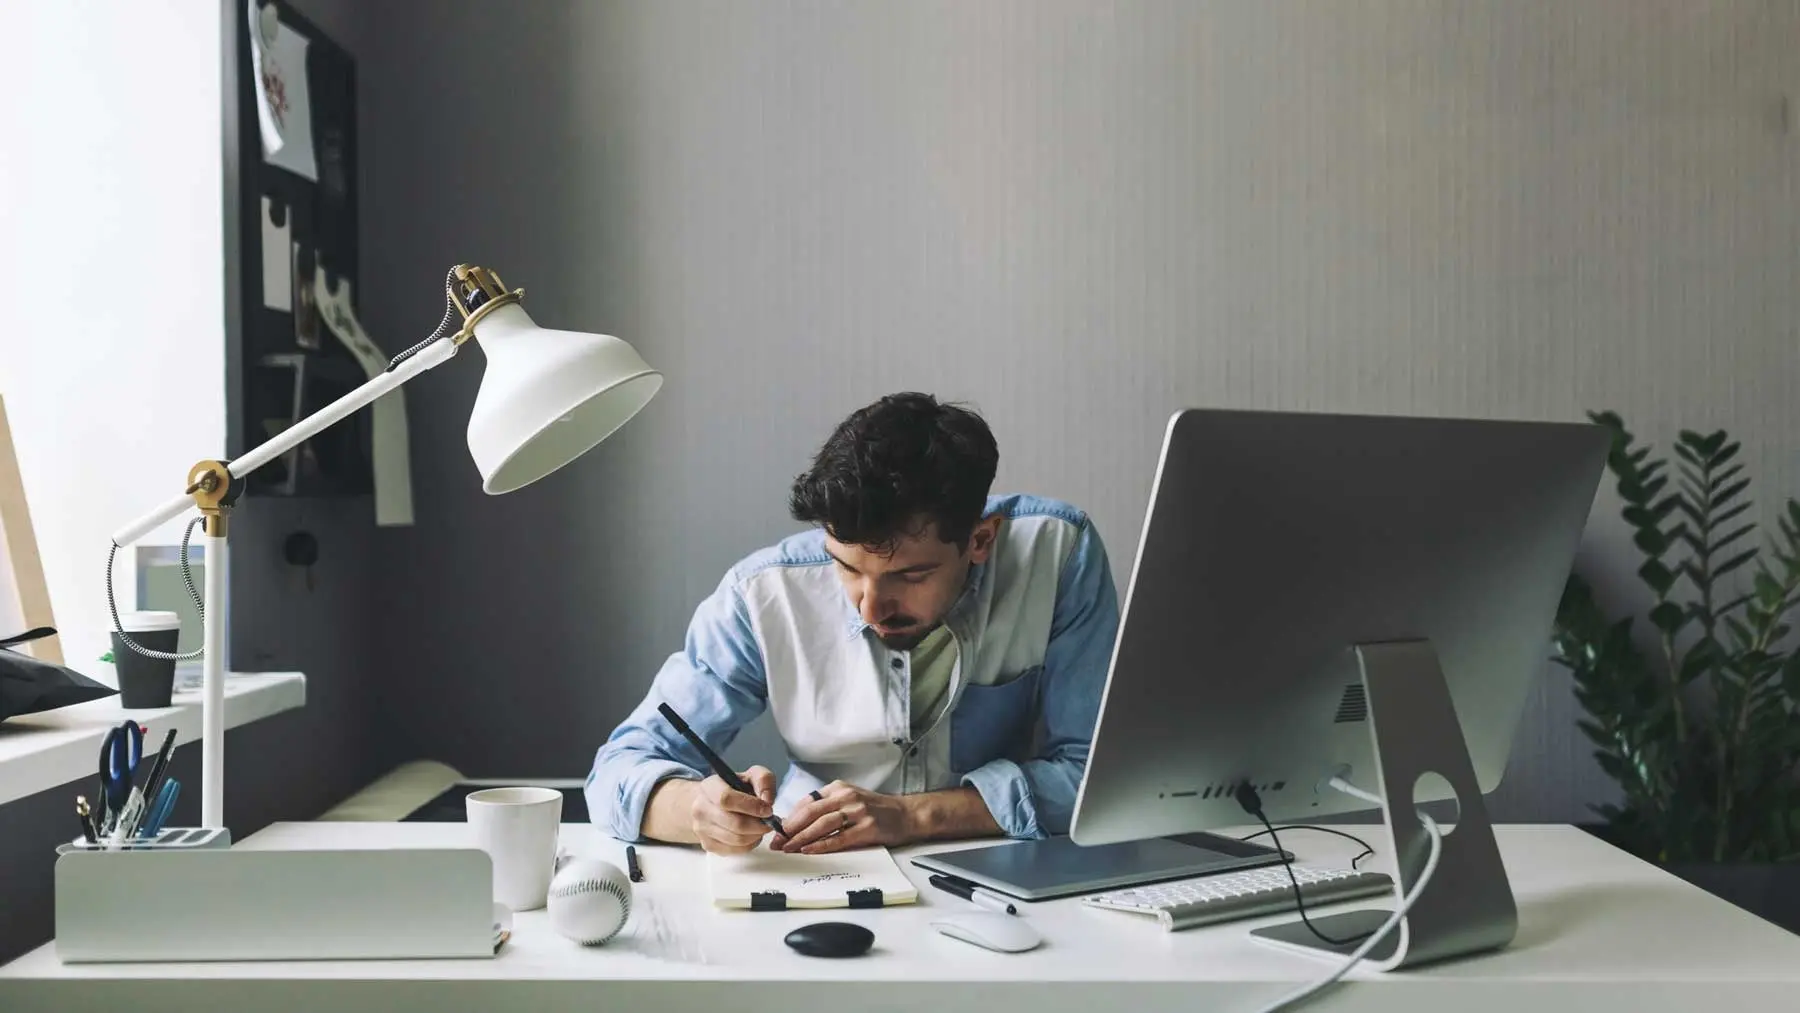 A man sits at his desk and focuses on his work.